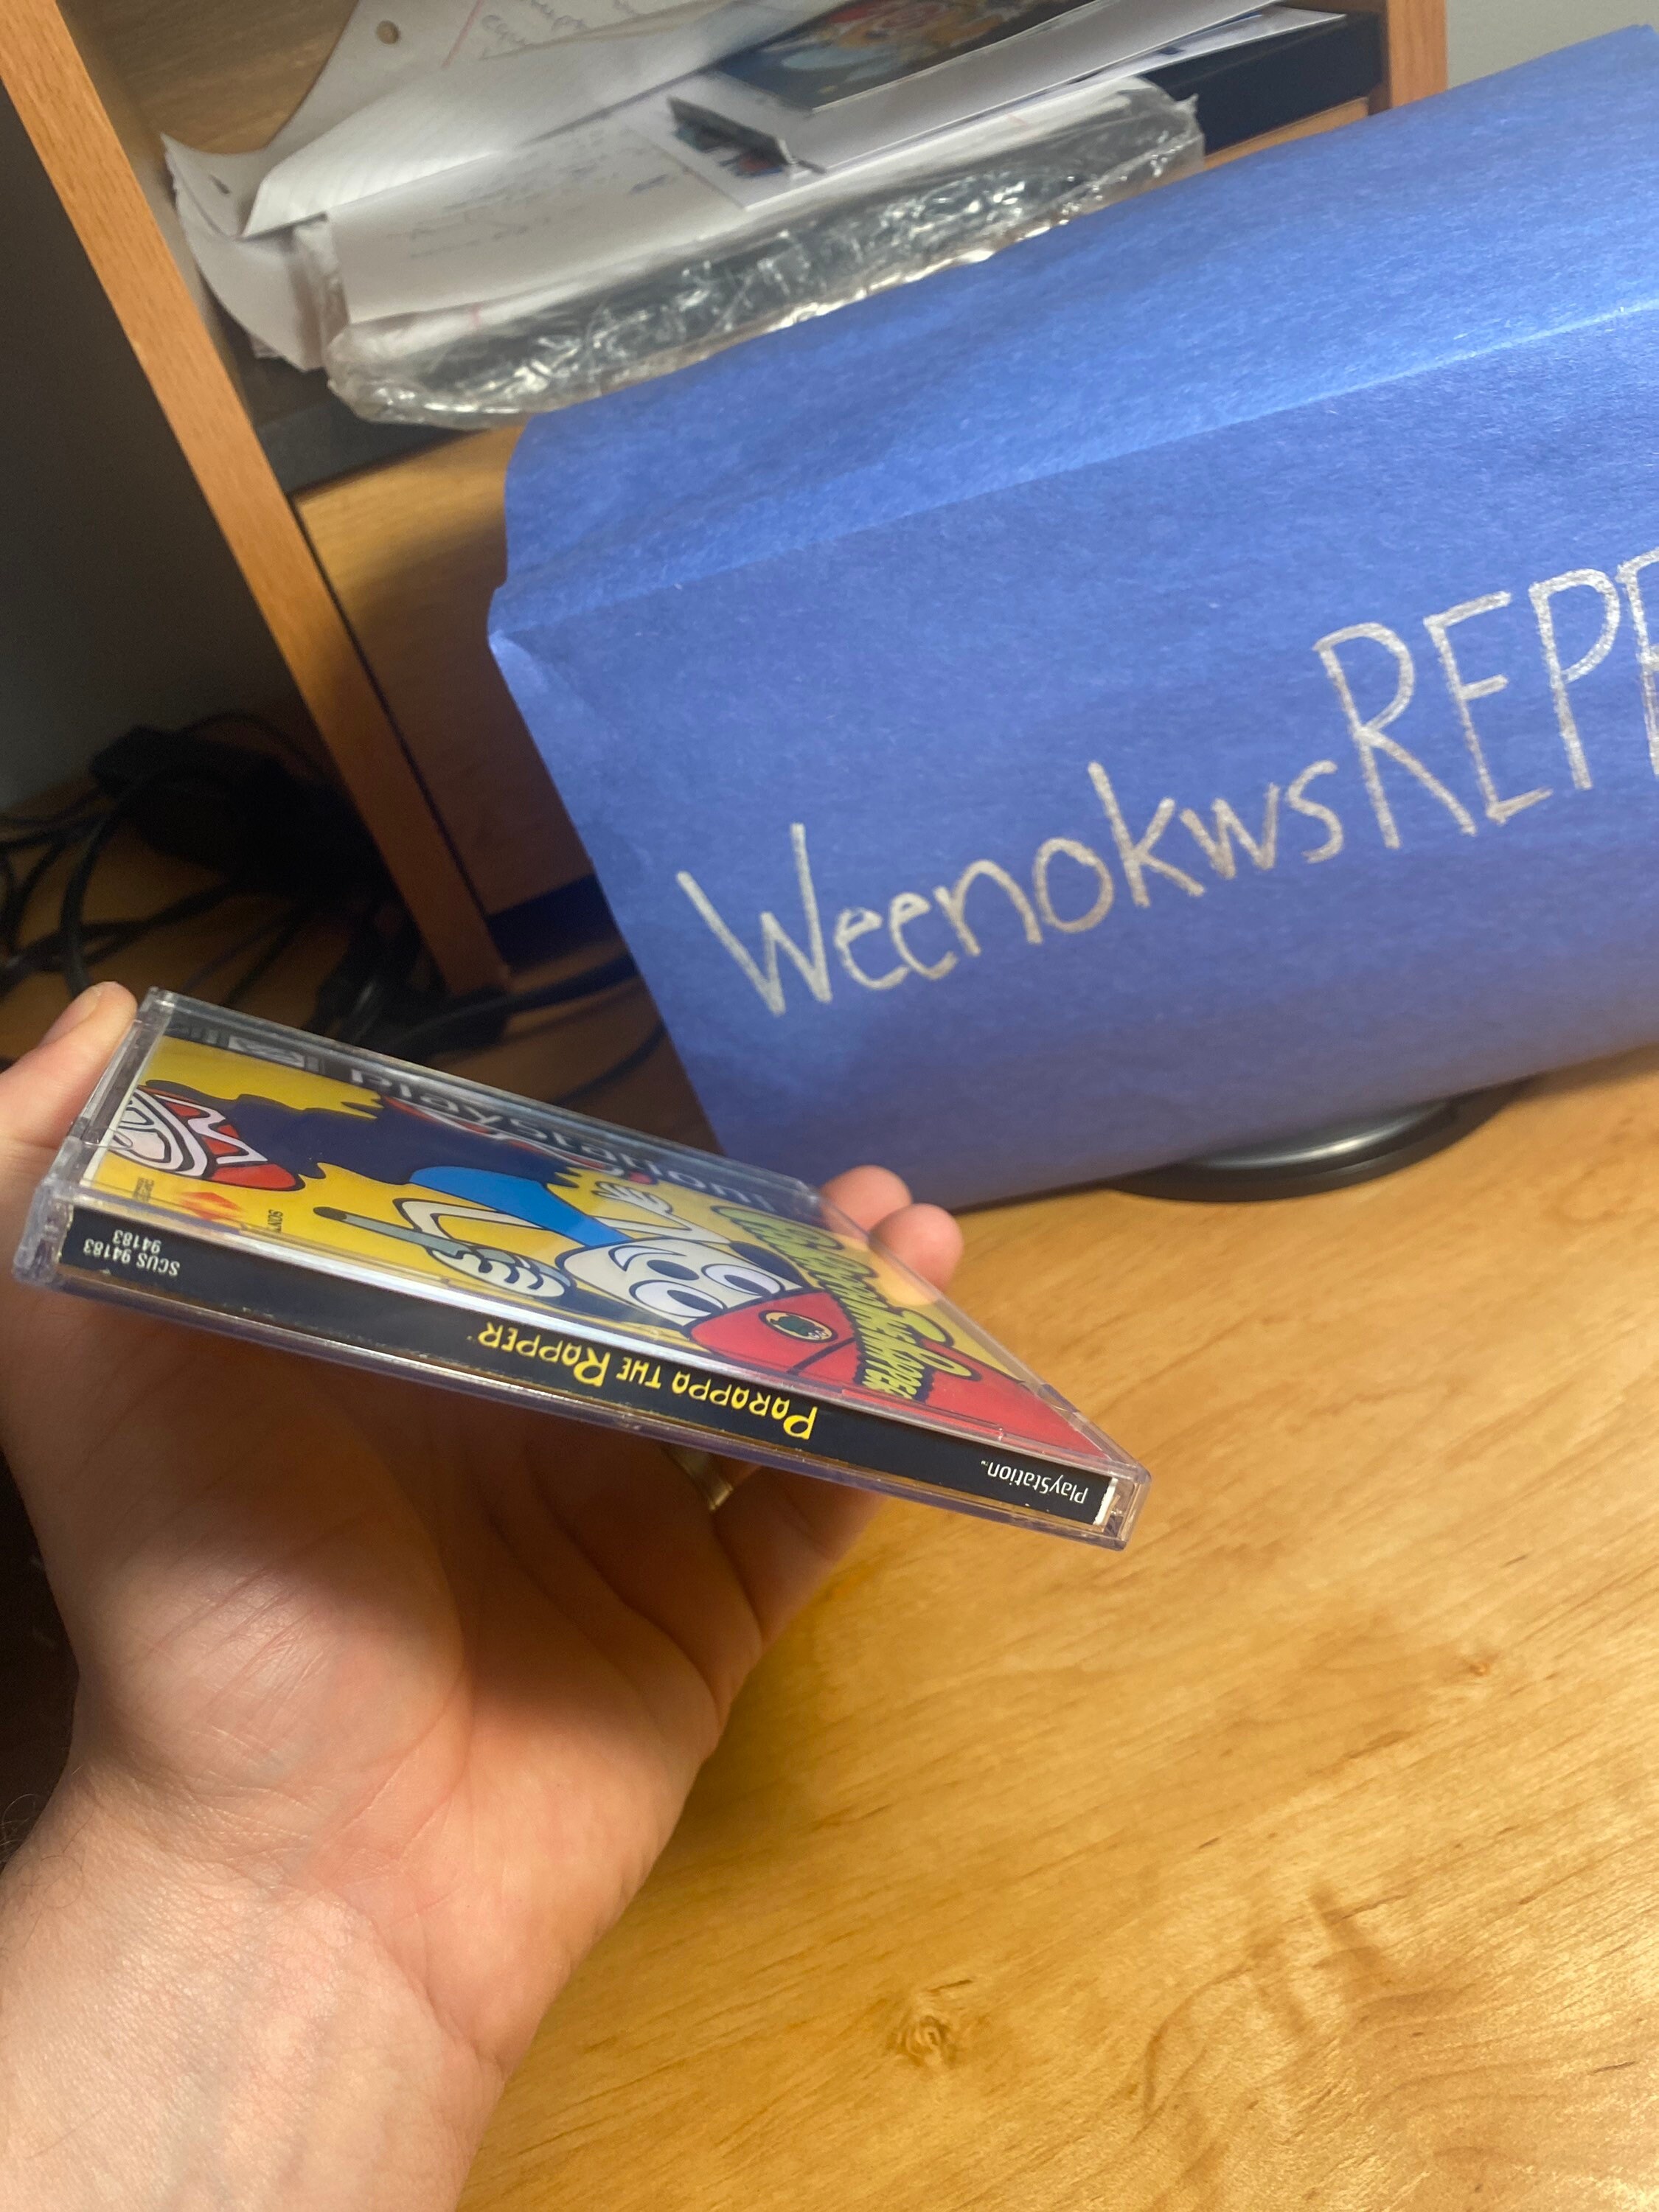 Parappa the Rapper PS1 Reproduction Case 